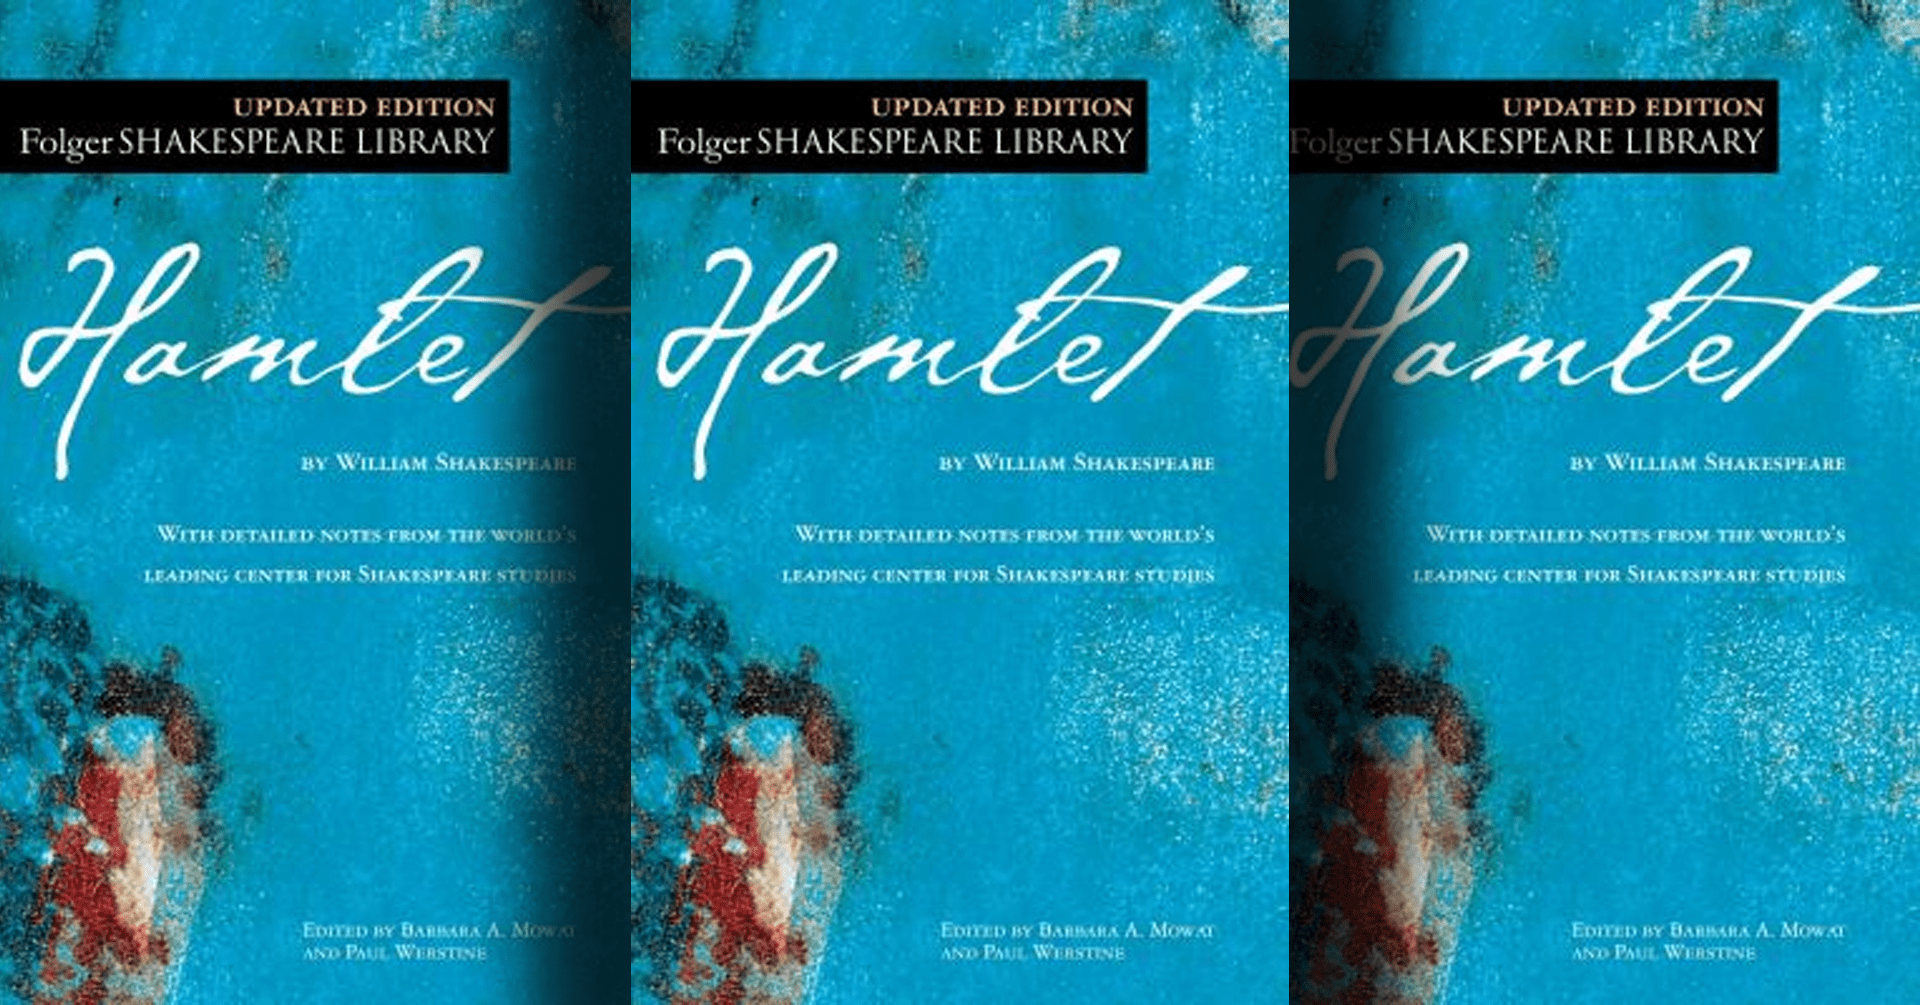 Hamplet by William Shakespeare (book cover)